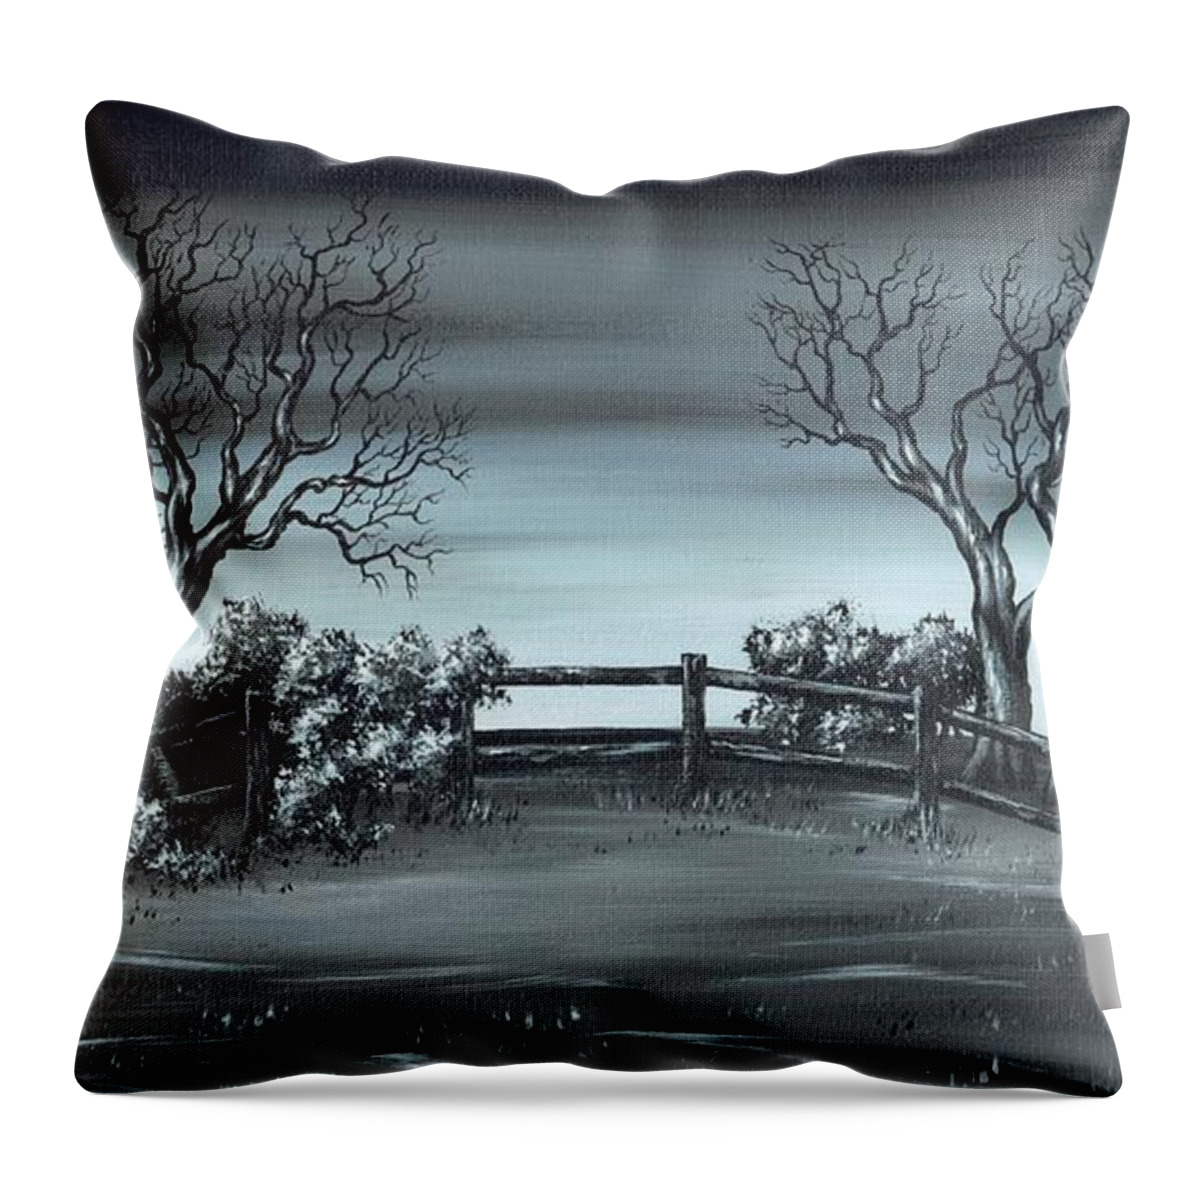 Landscapes Throw Pillow featuring the painting Landsend by Kenneth Clarke